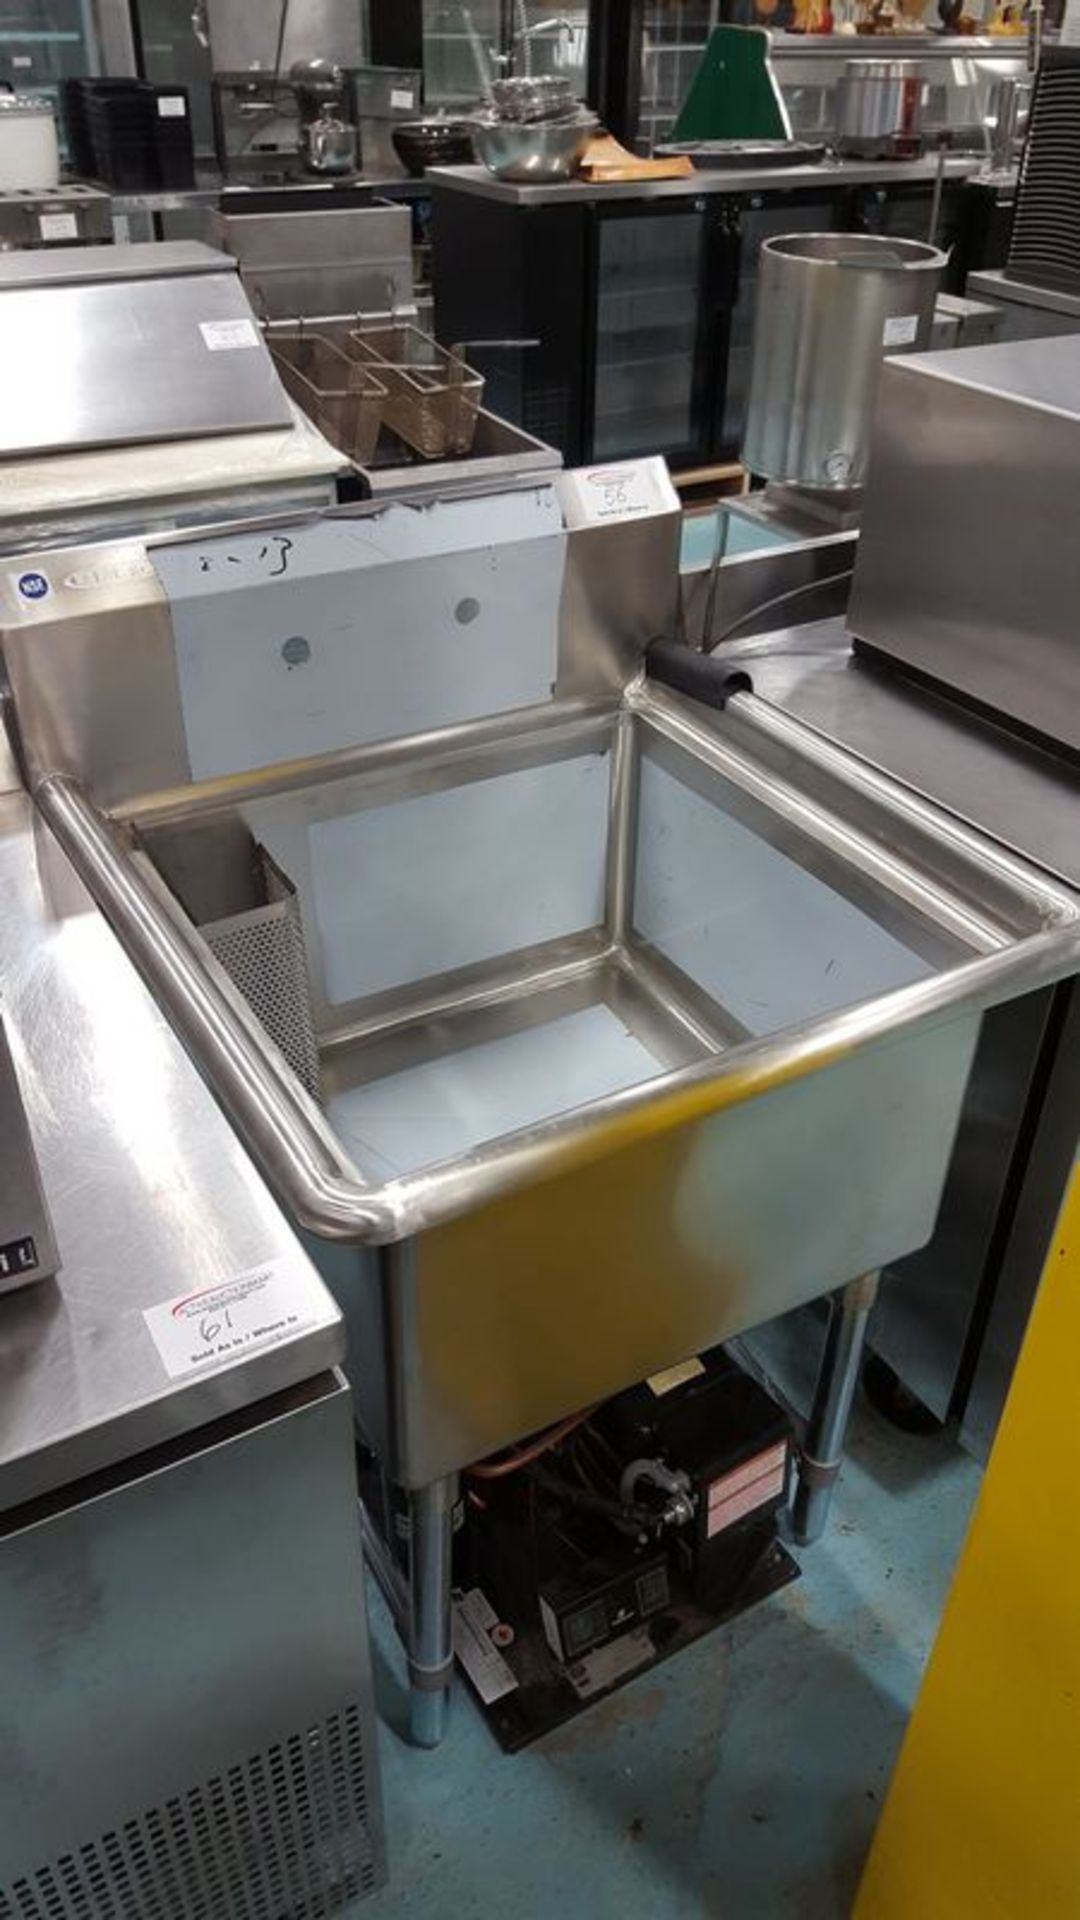 24 x 24 " Stainless steel sink